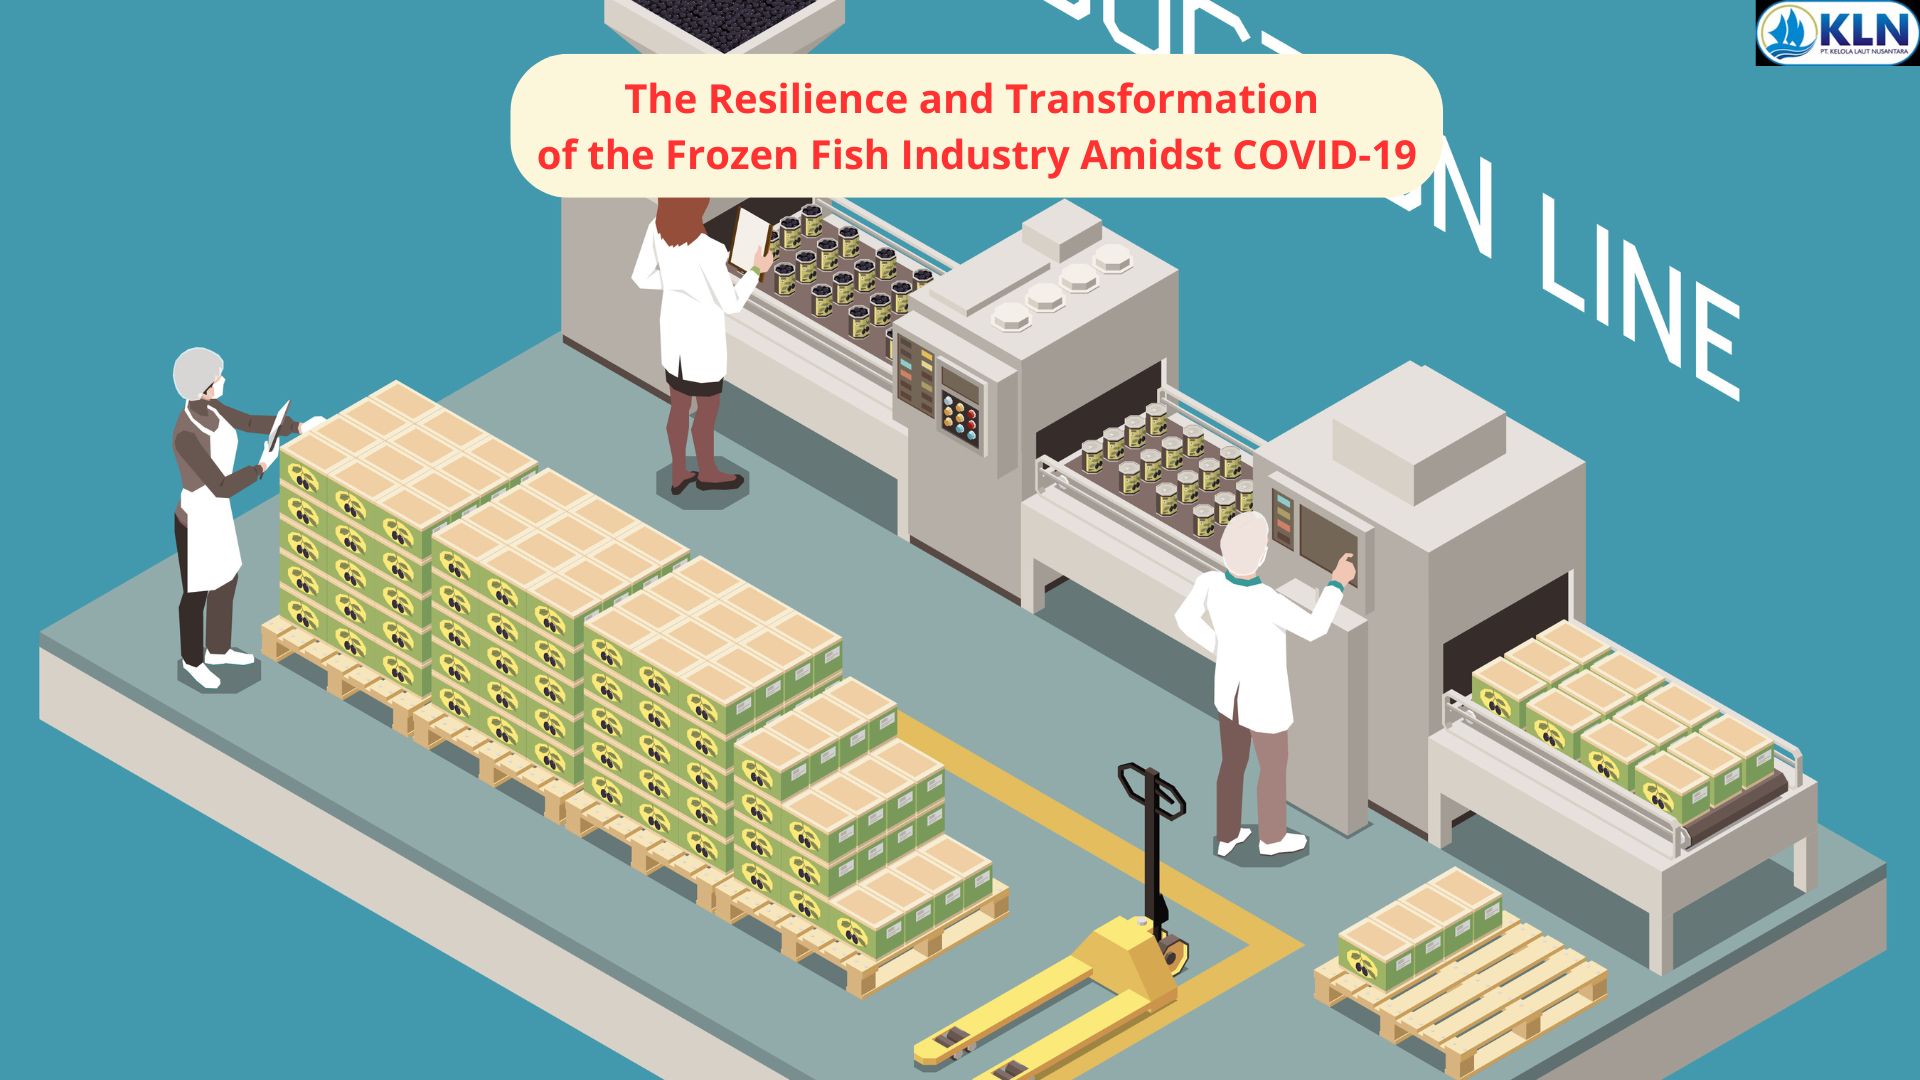 The Resilience and Transformation of the Frozen Fish Industry Amidst COVID-19